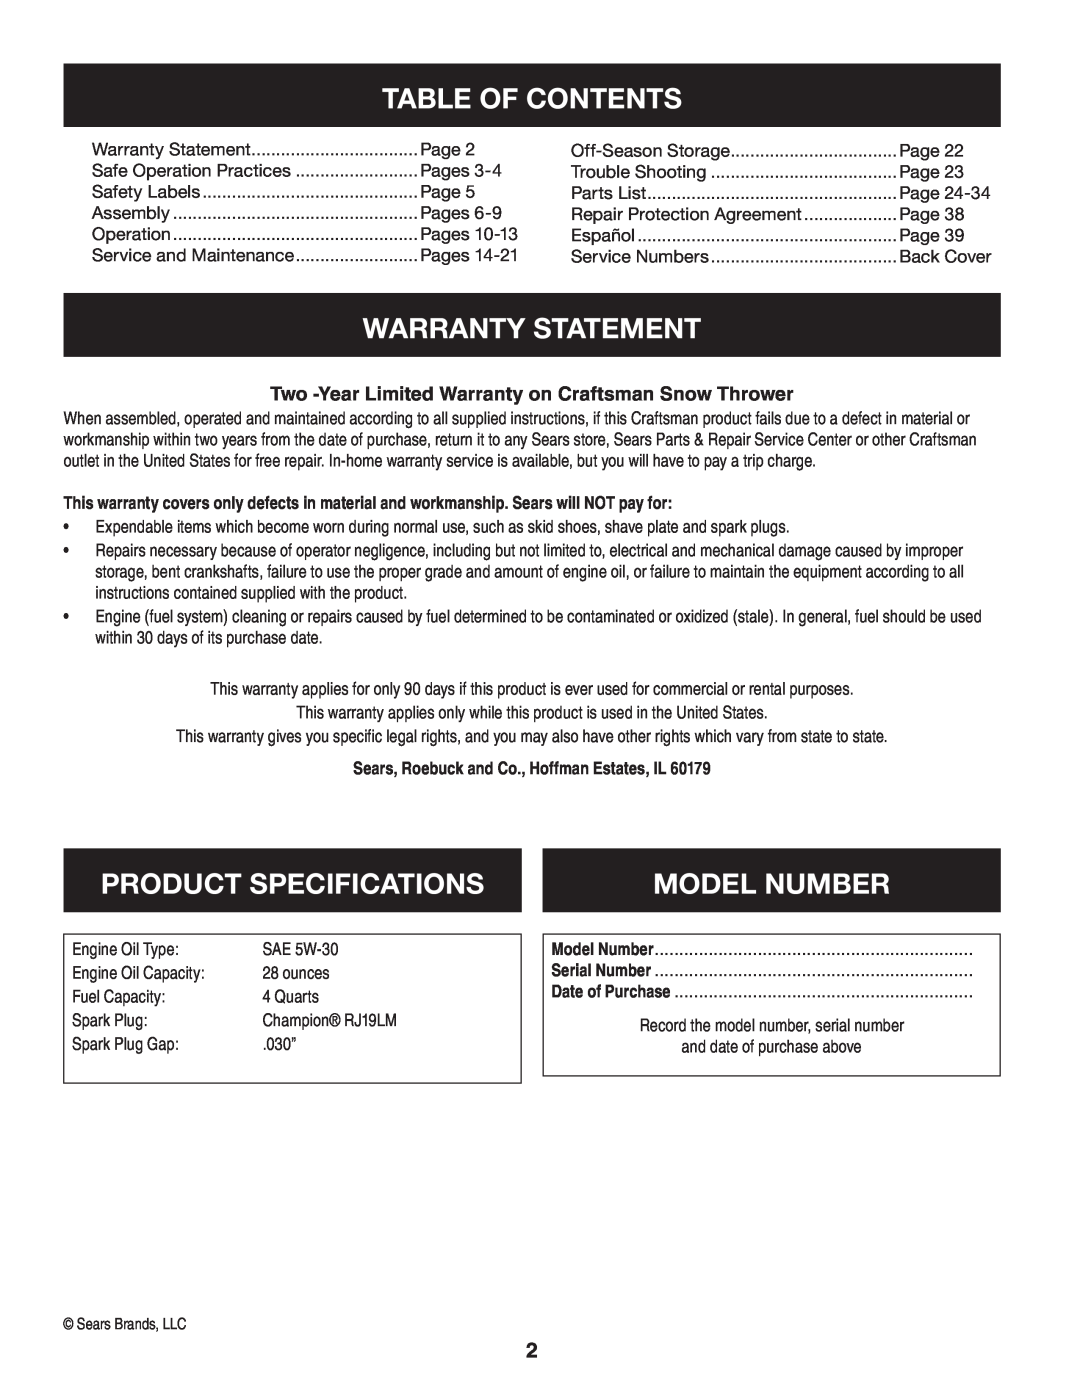 Craftsman 247.88045 manual Table Of Contents, Warranty Statement, Product Specifications, Model Number 